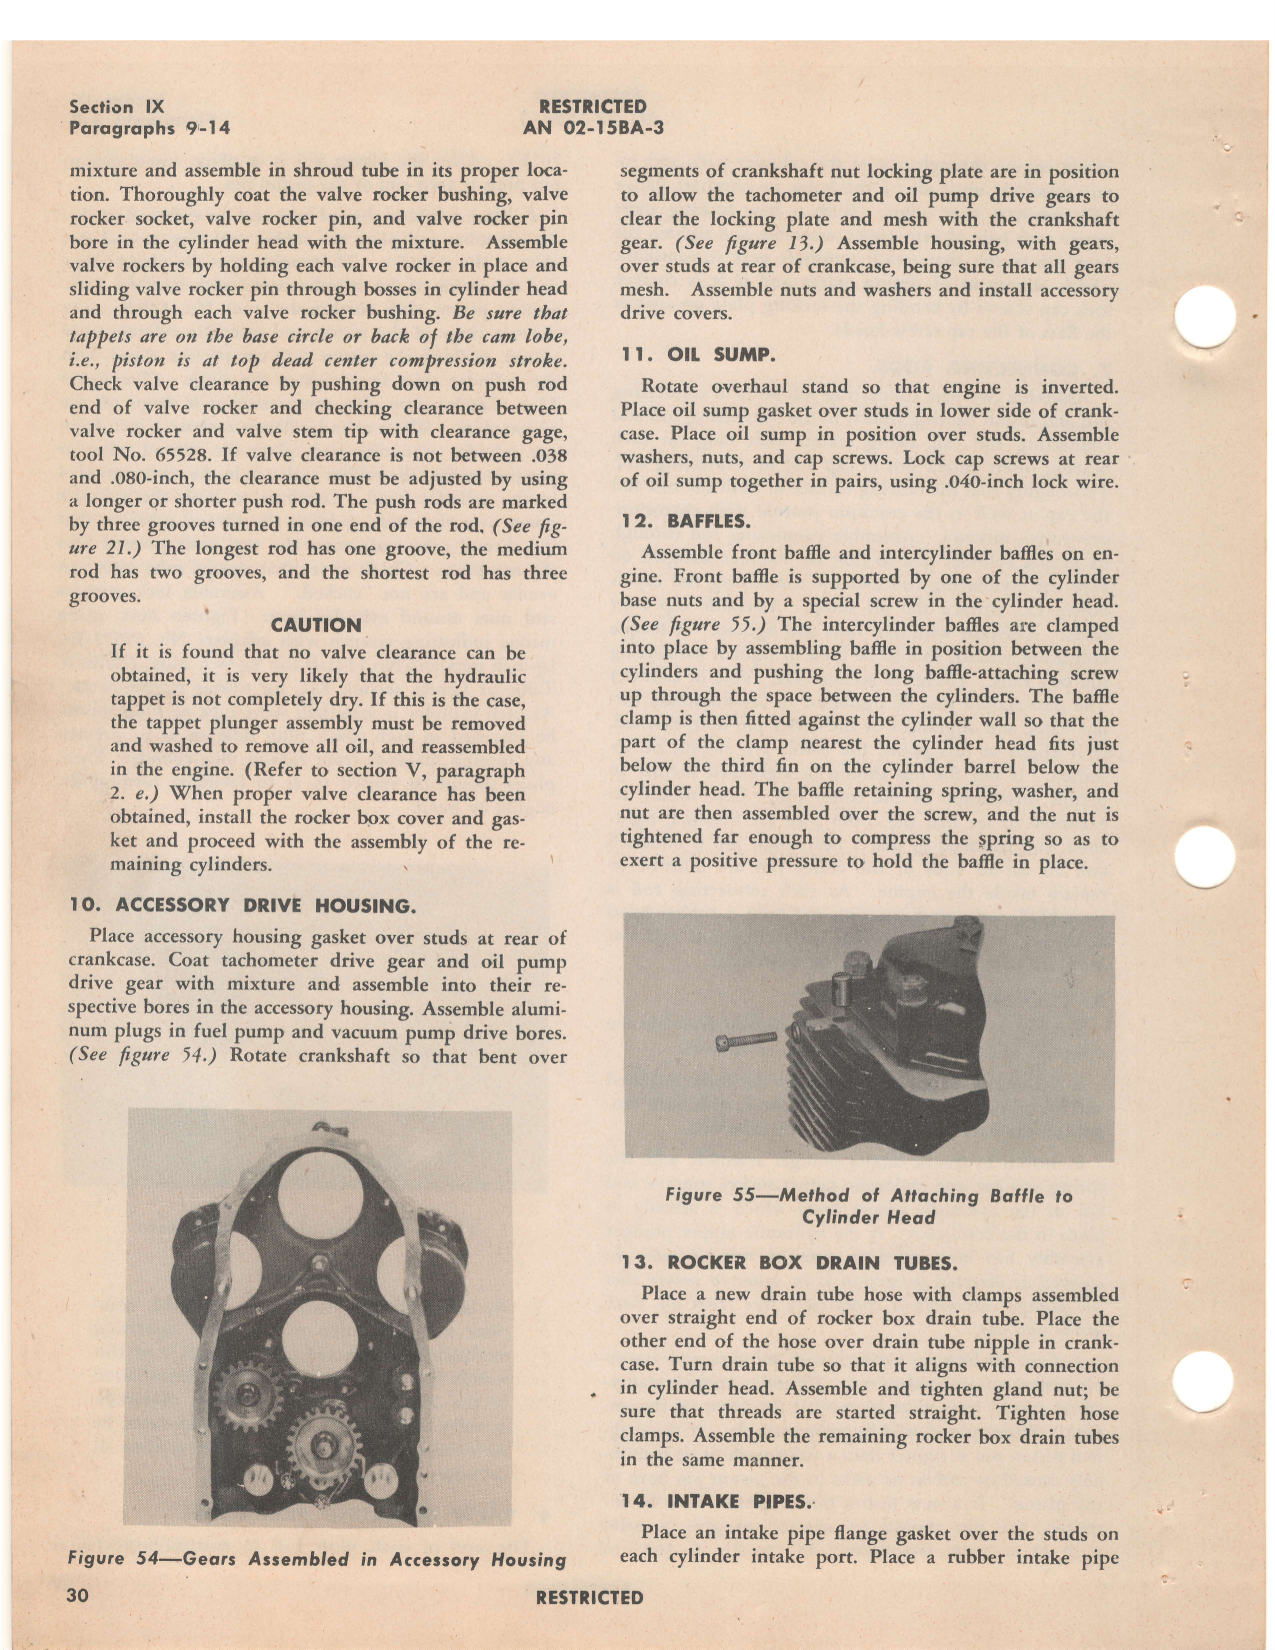 Sample page 34 from AirCorps Library document: Overhaul Instructions - O-435-1 Engines